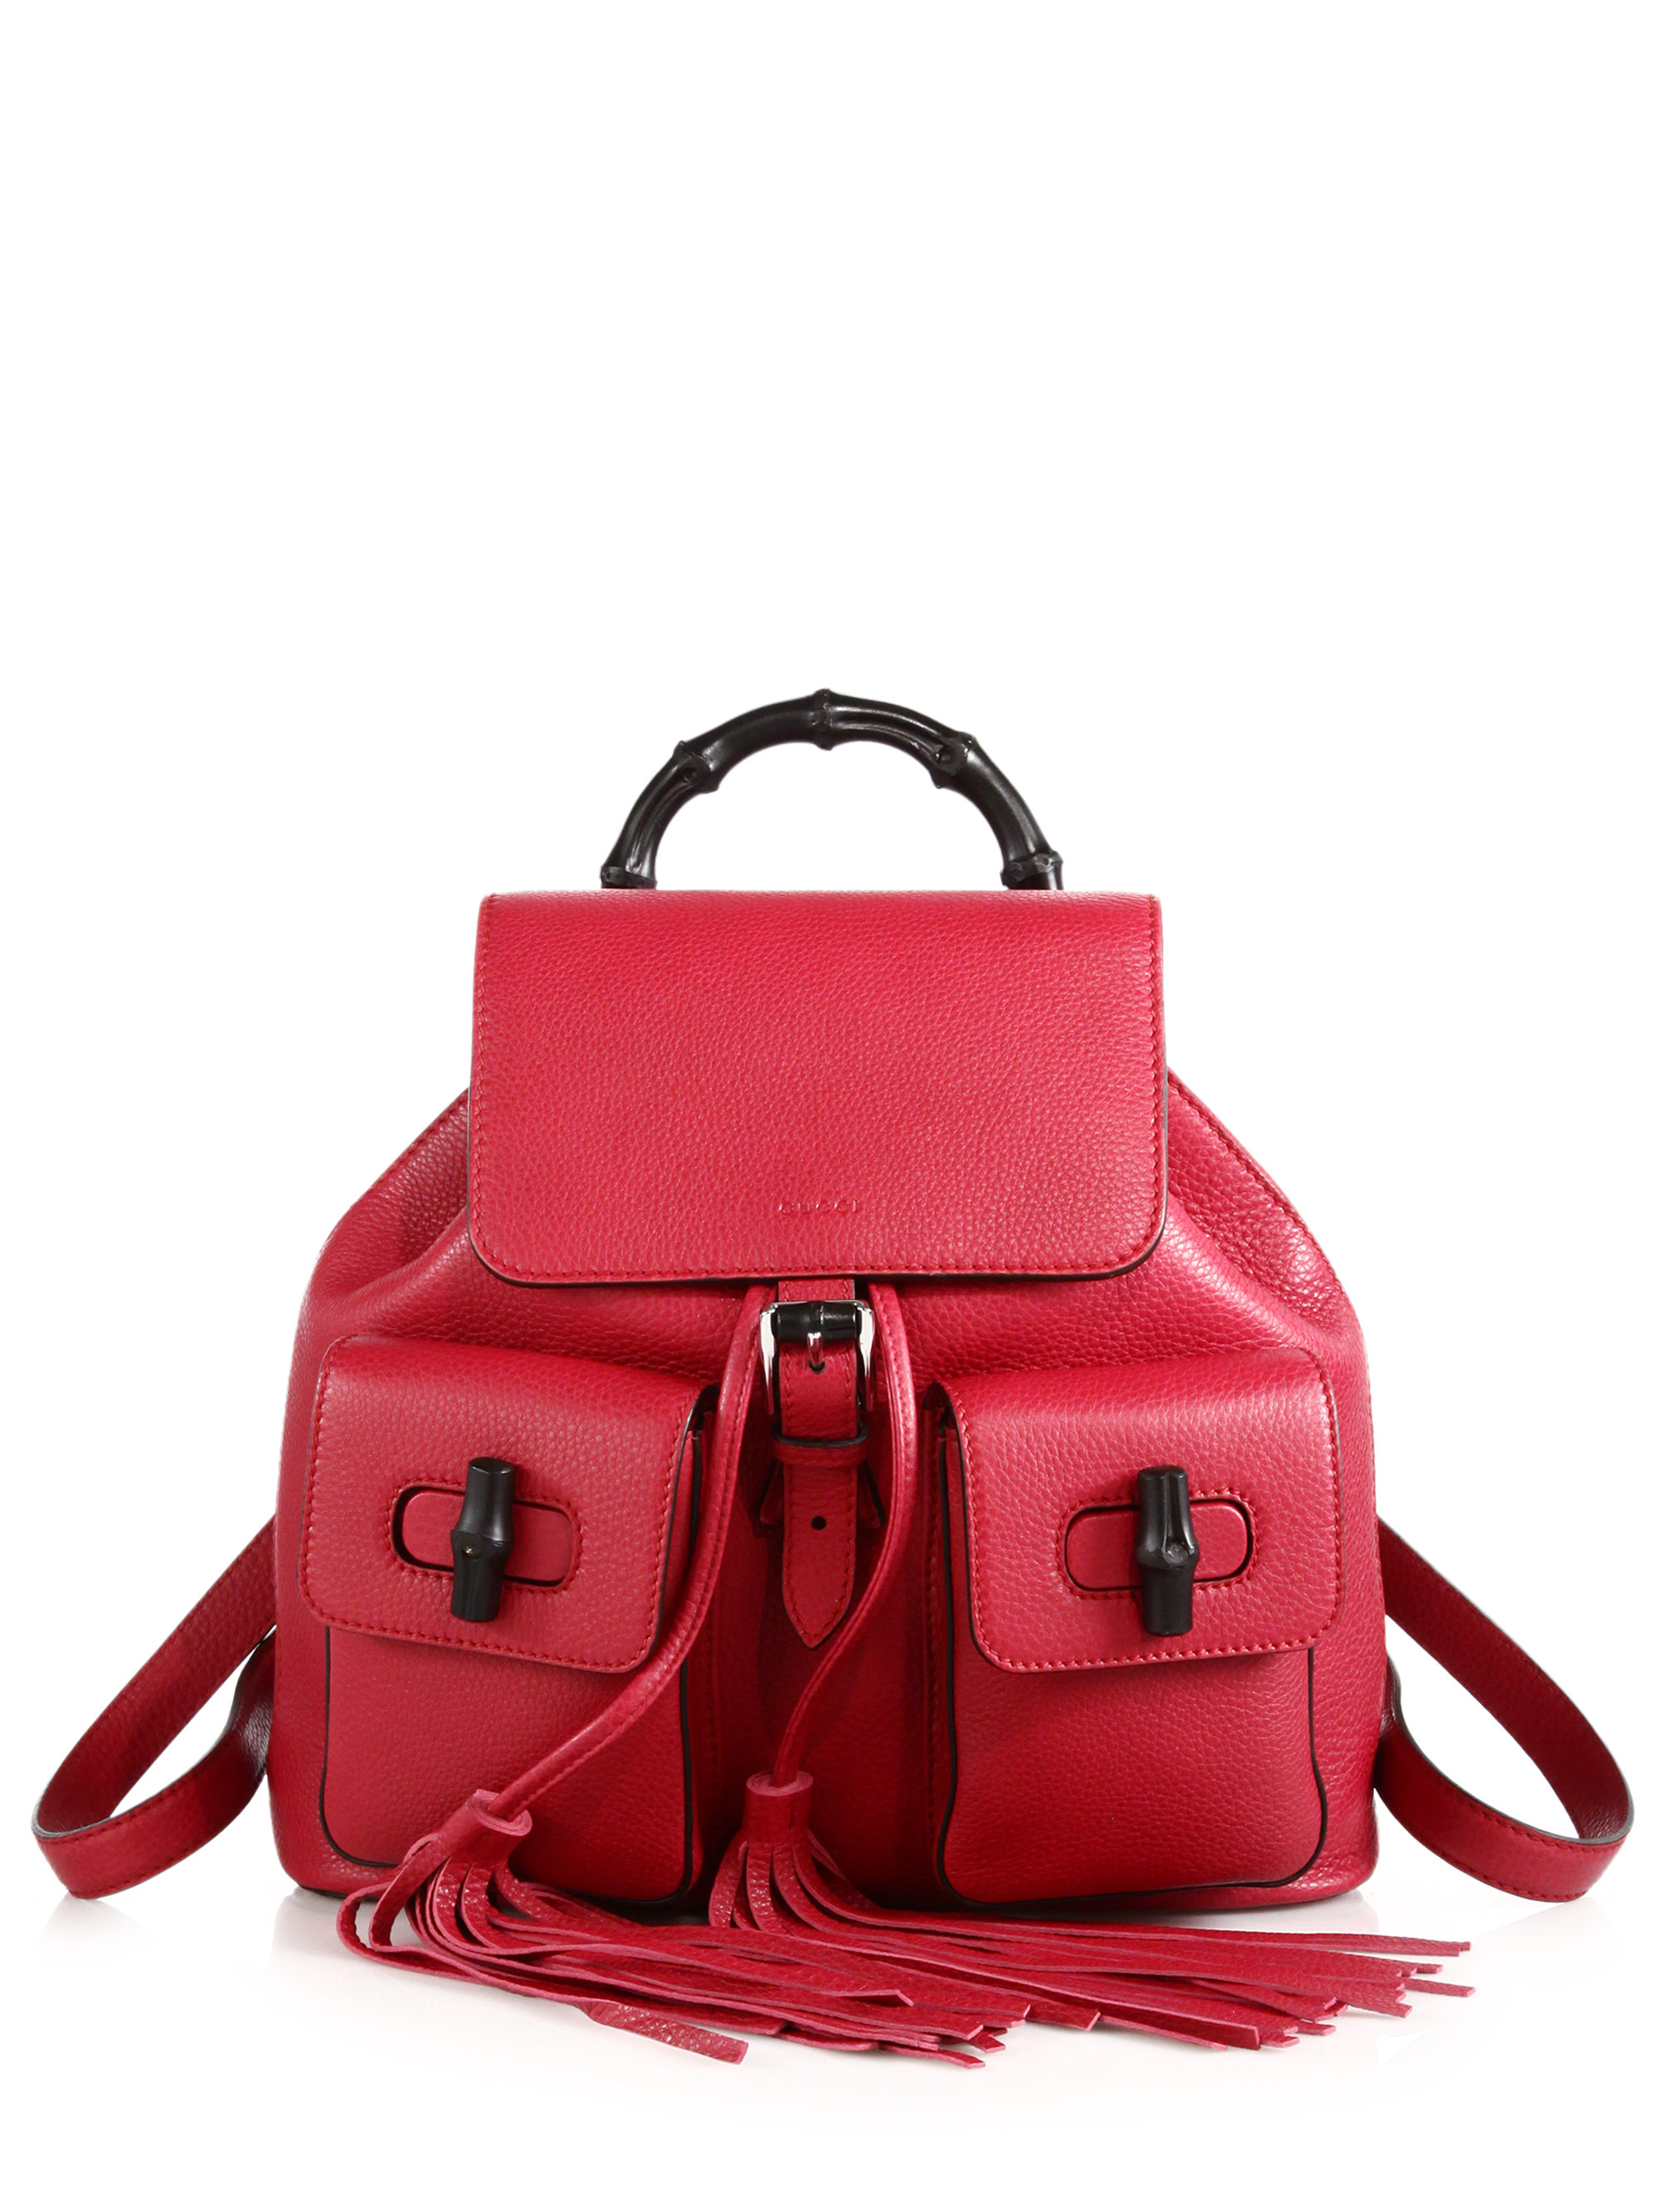 Gucci Bamboo Sac Leather Backpack in Red | Lyst